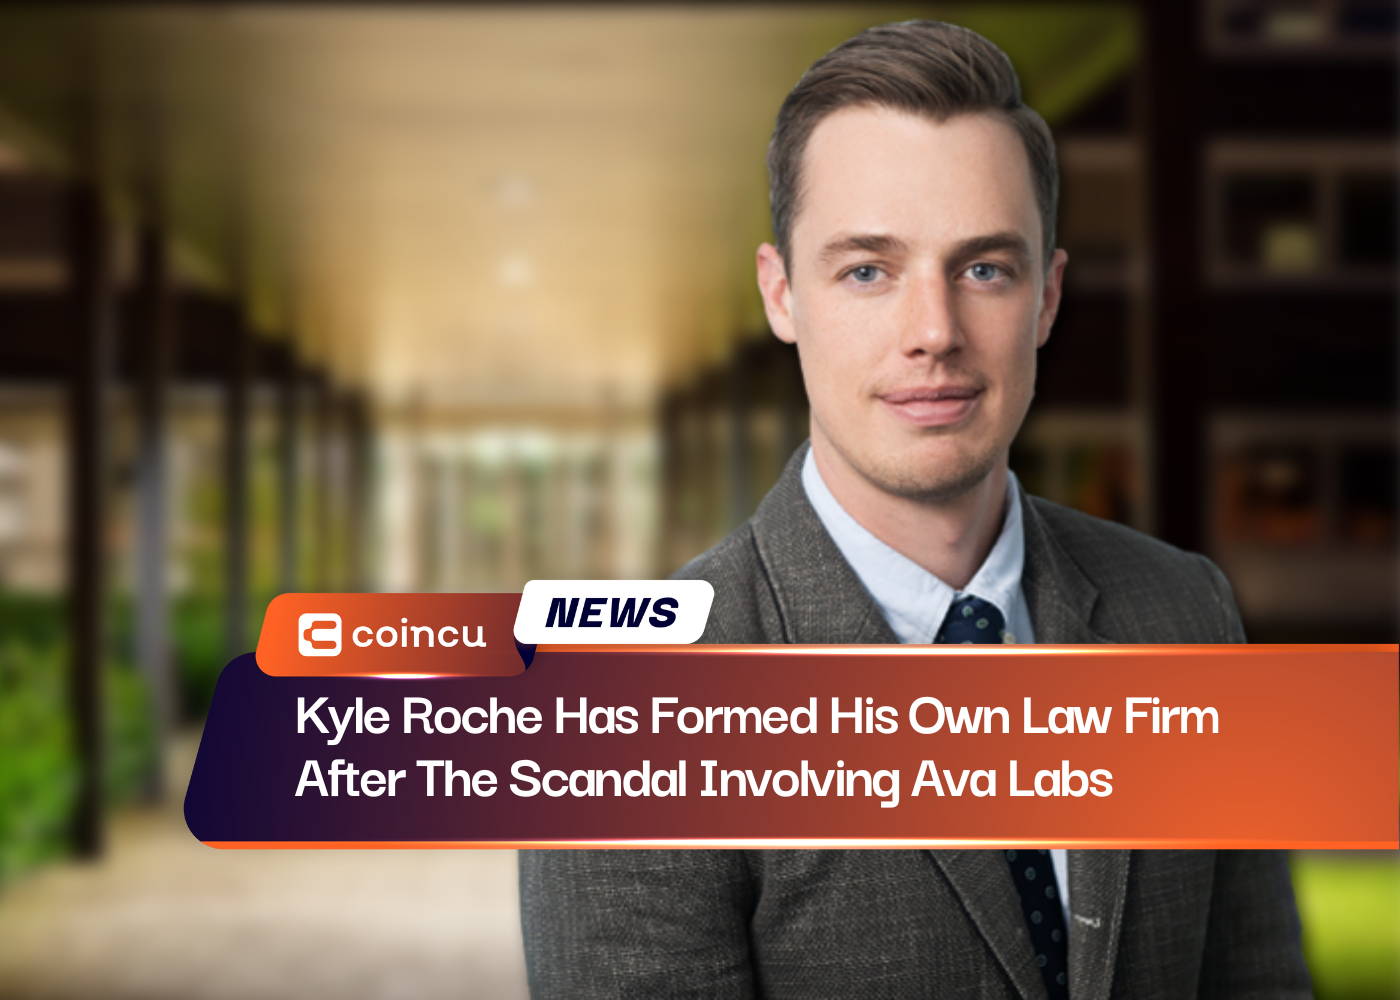 Kyle Roche Has Formed His Own Law Firm After The Scandal Involving Ava Labs